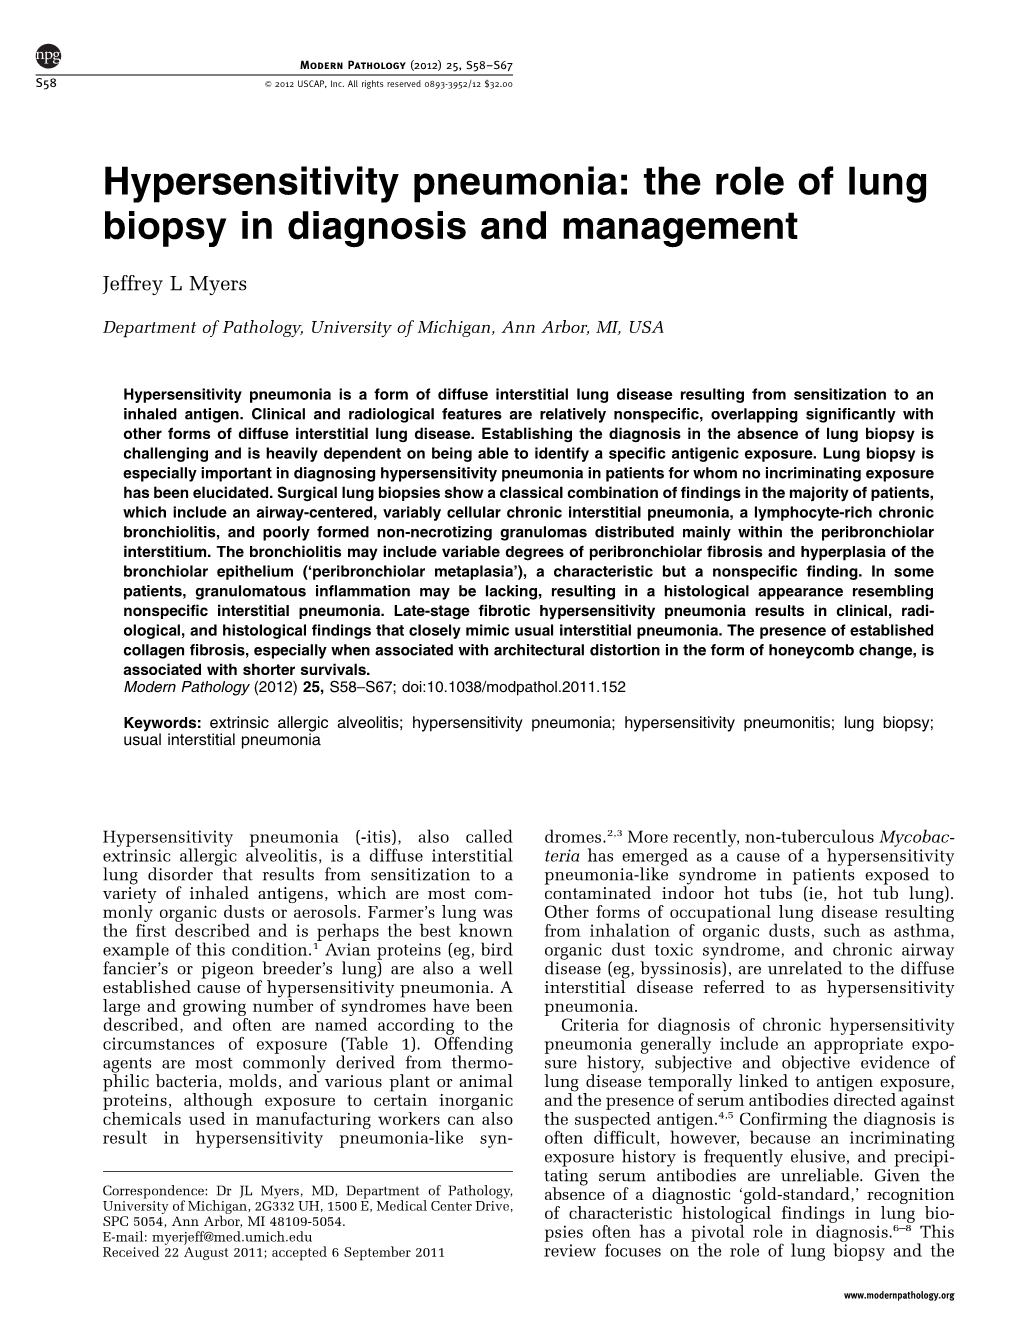 Hypersensitivity Pneumonia: the Role of Lung Biopsy in Diagnosis and Management